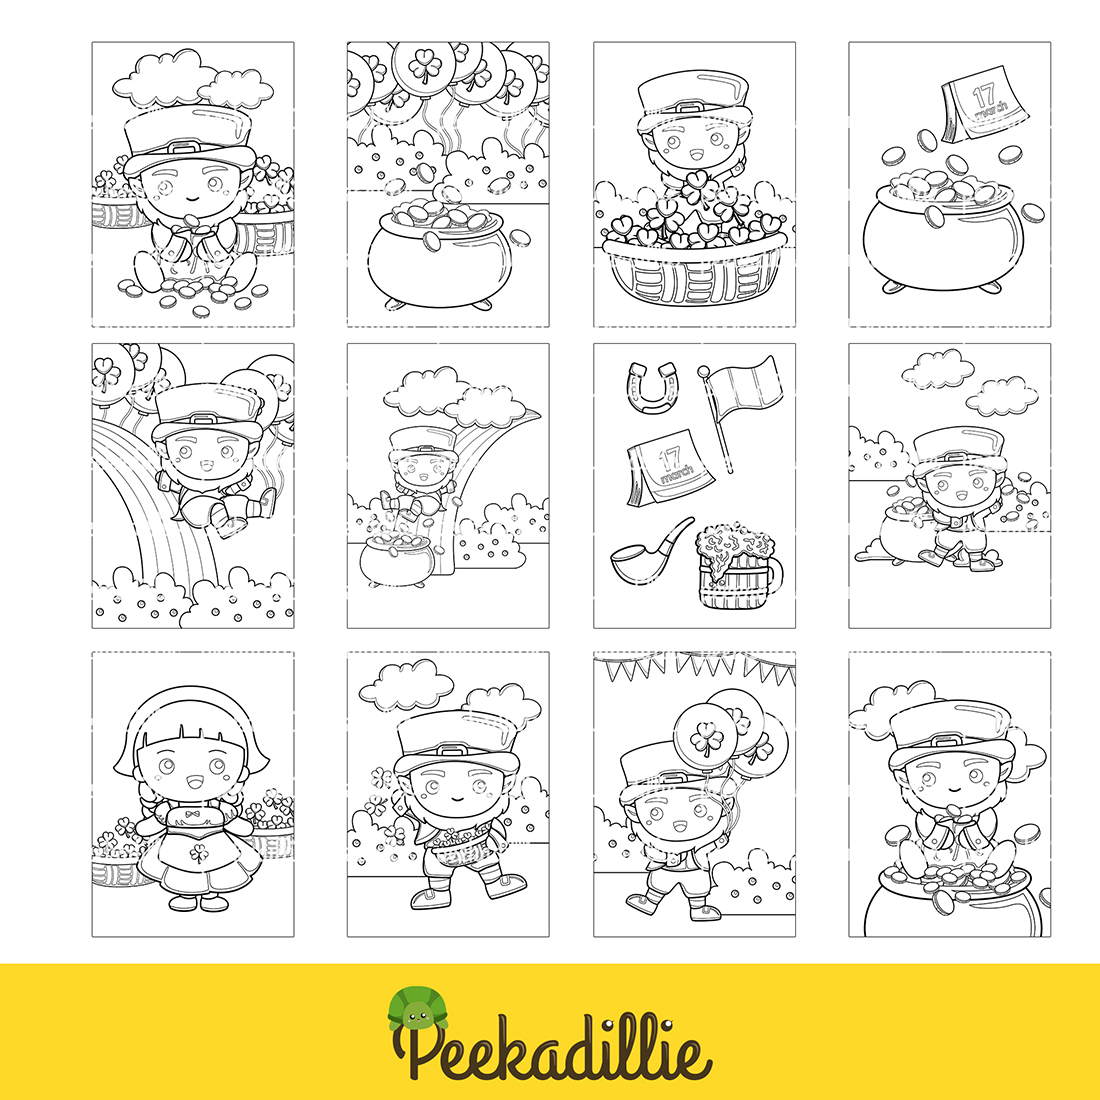 St Patrick Day Holiday Irish Green Coloring Pages Activity For Kids And Adult preview image.